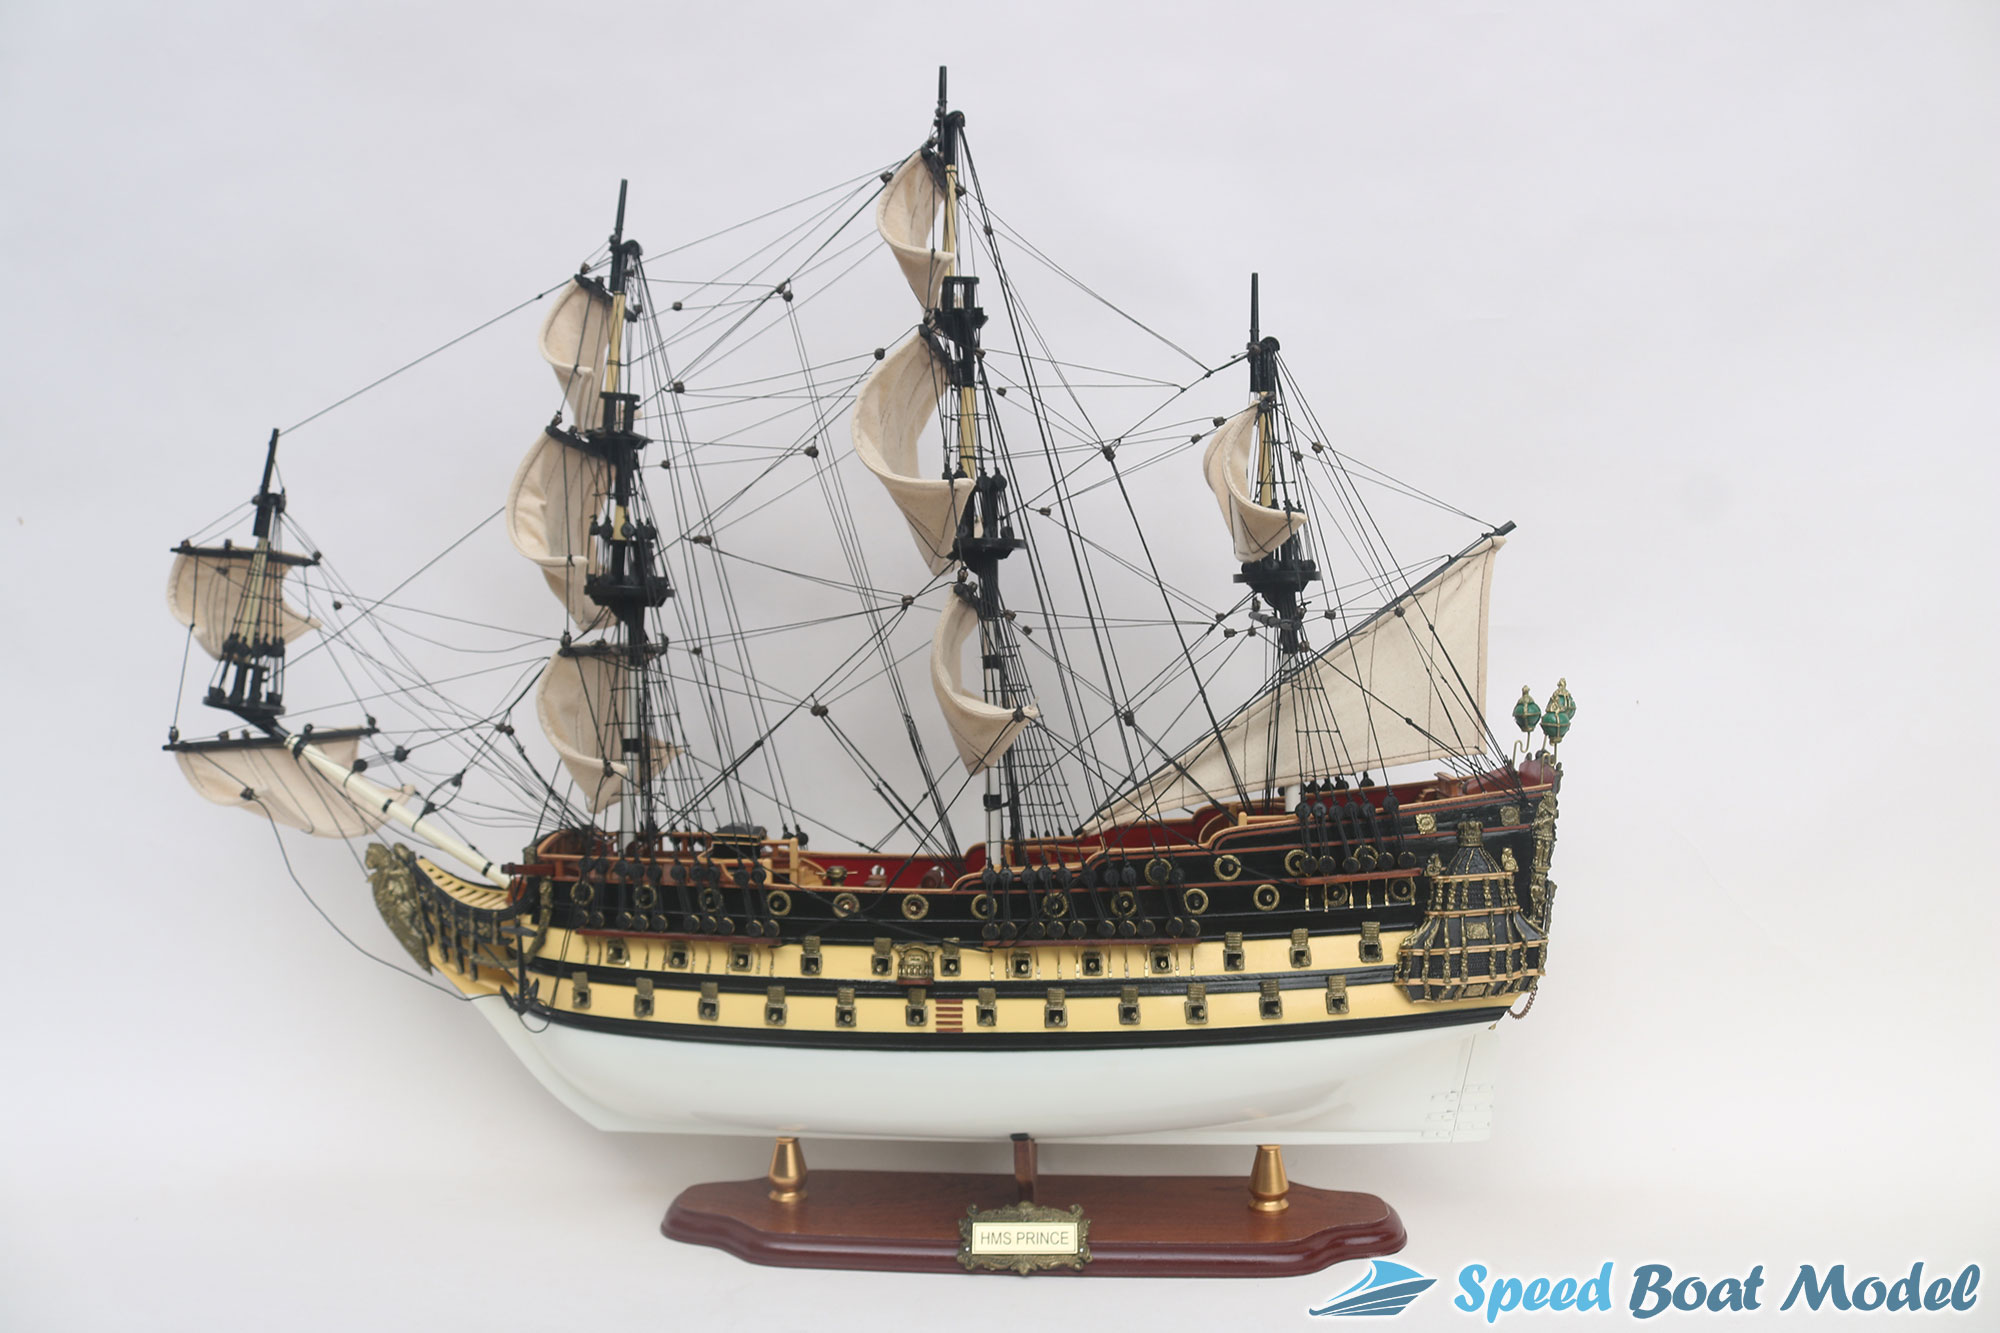 Hms Prince Painted Tall Ship Model 37"